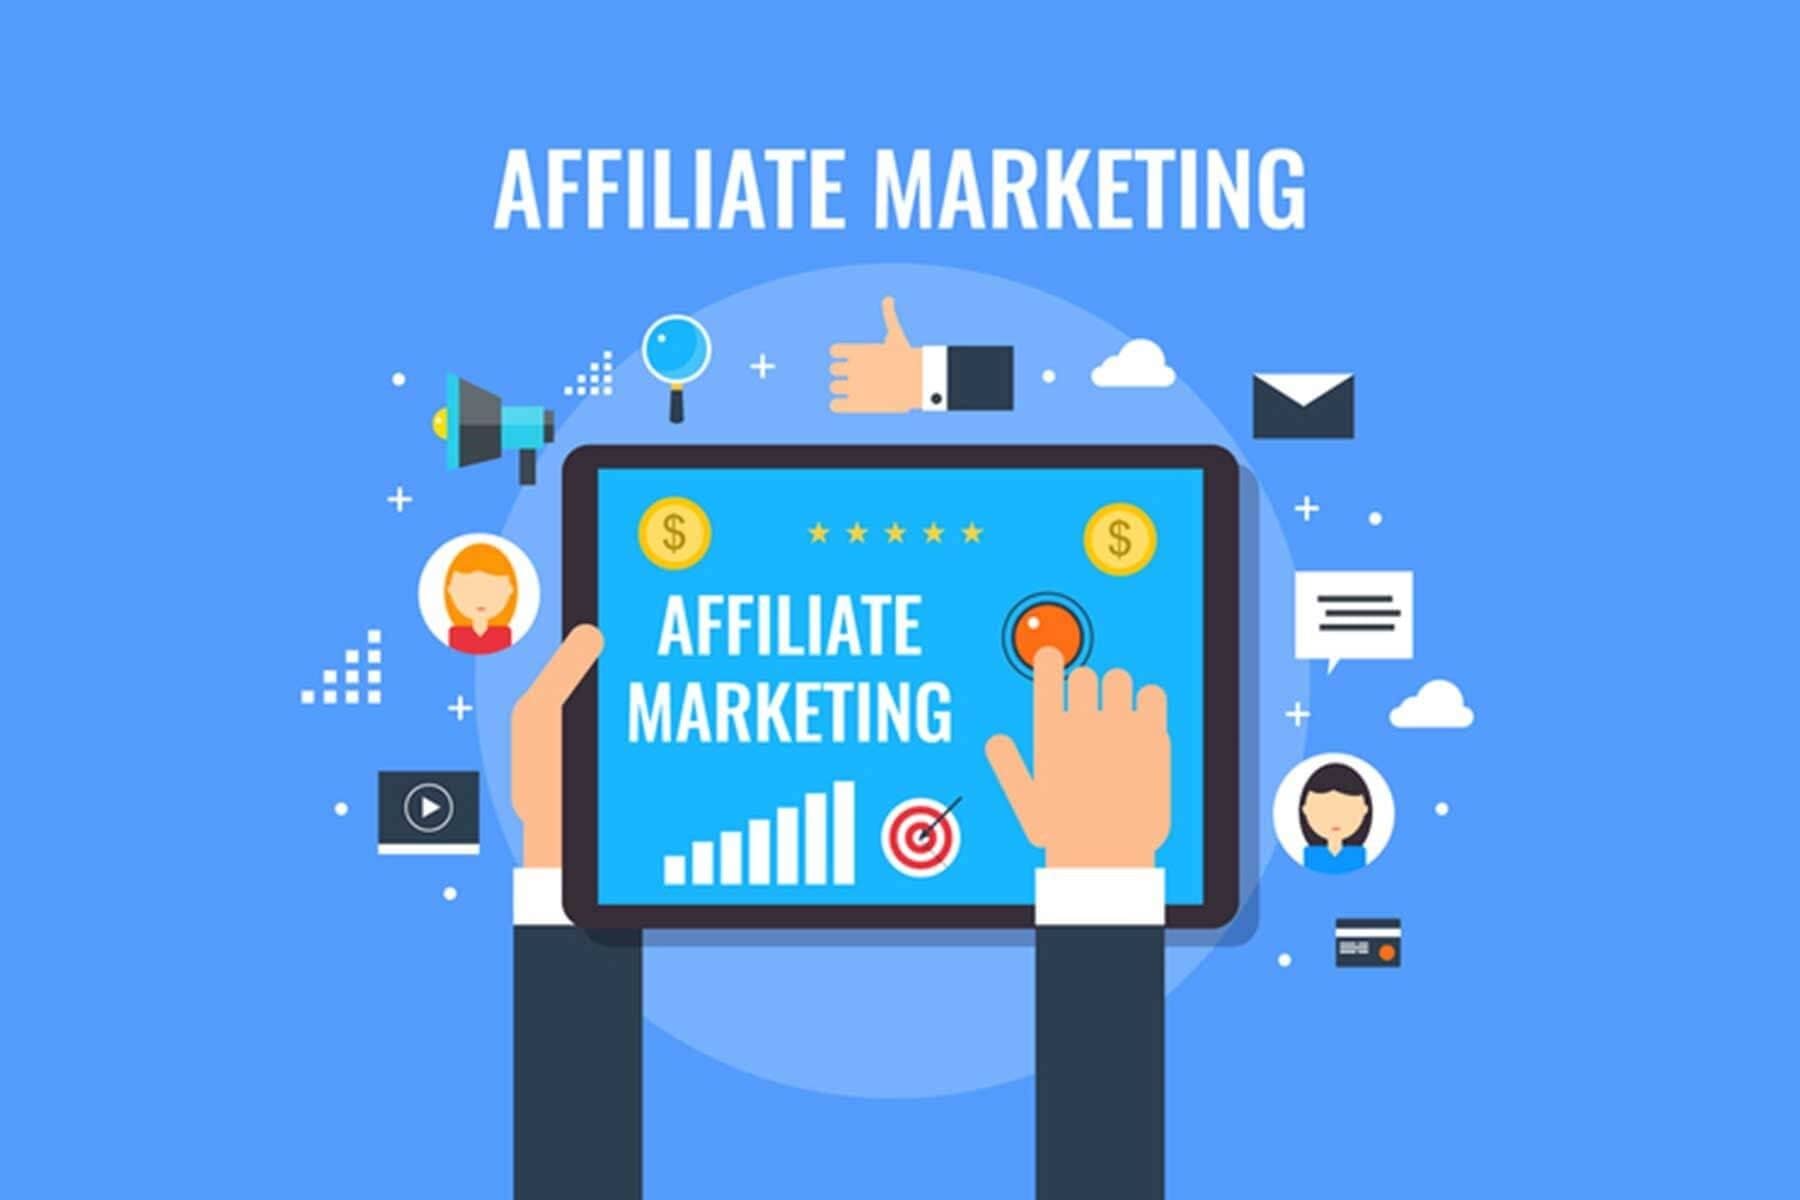 How to Make Money Through Affiliate Marketing with Free Traffic